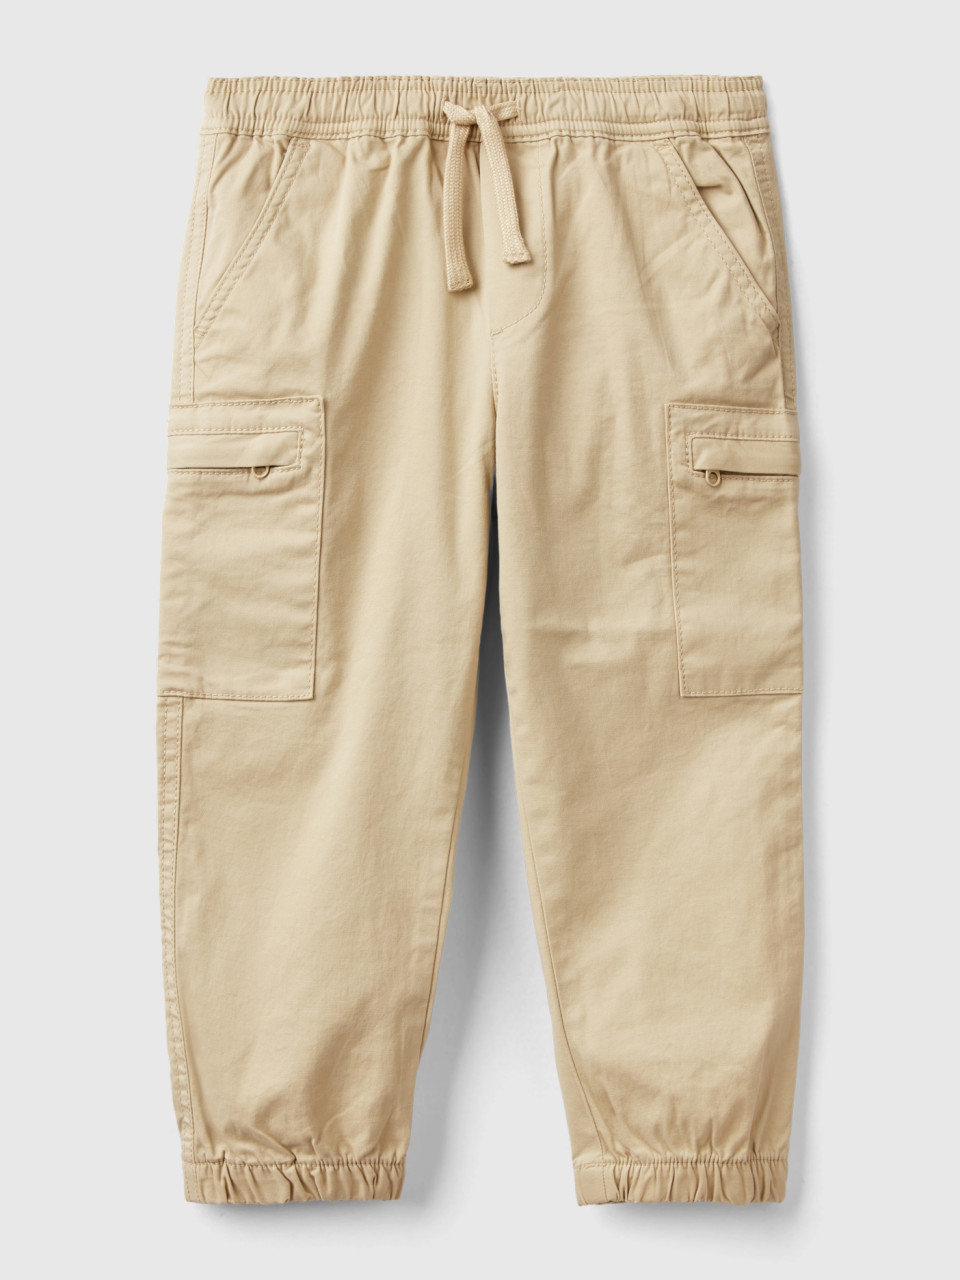 Benetton, Cargo Trousers With Drawstring, Beige, Kids